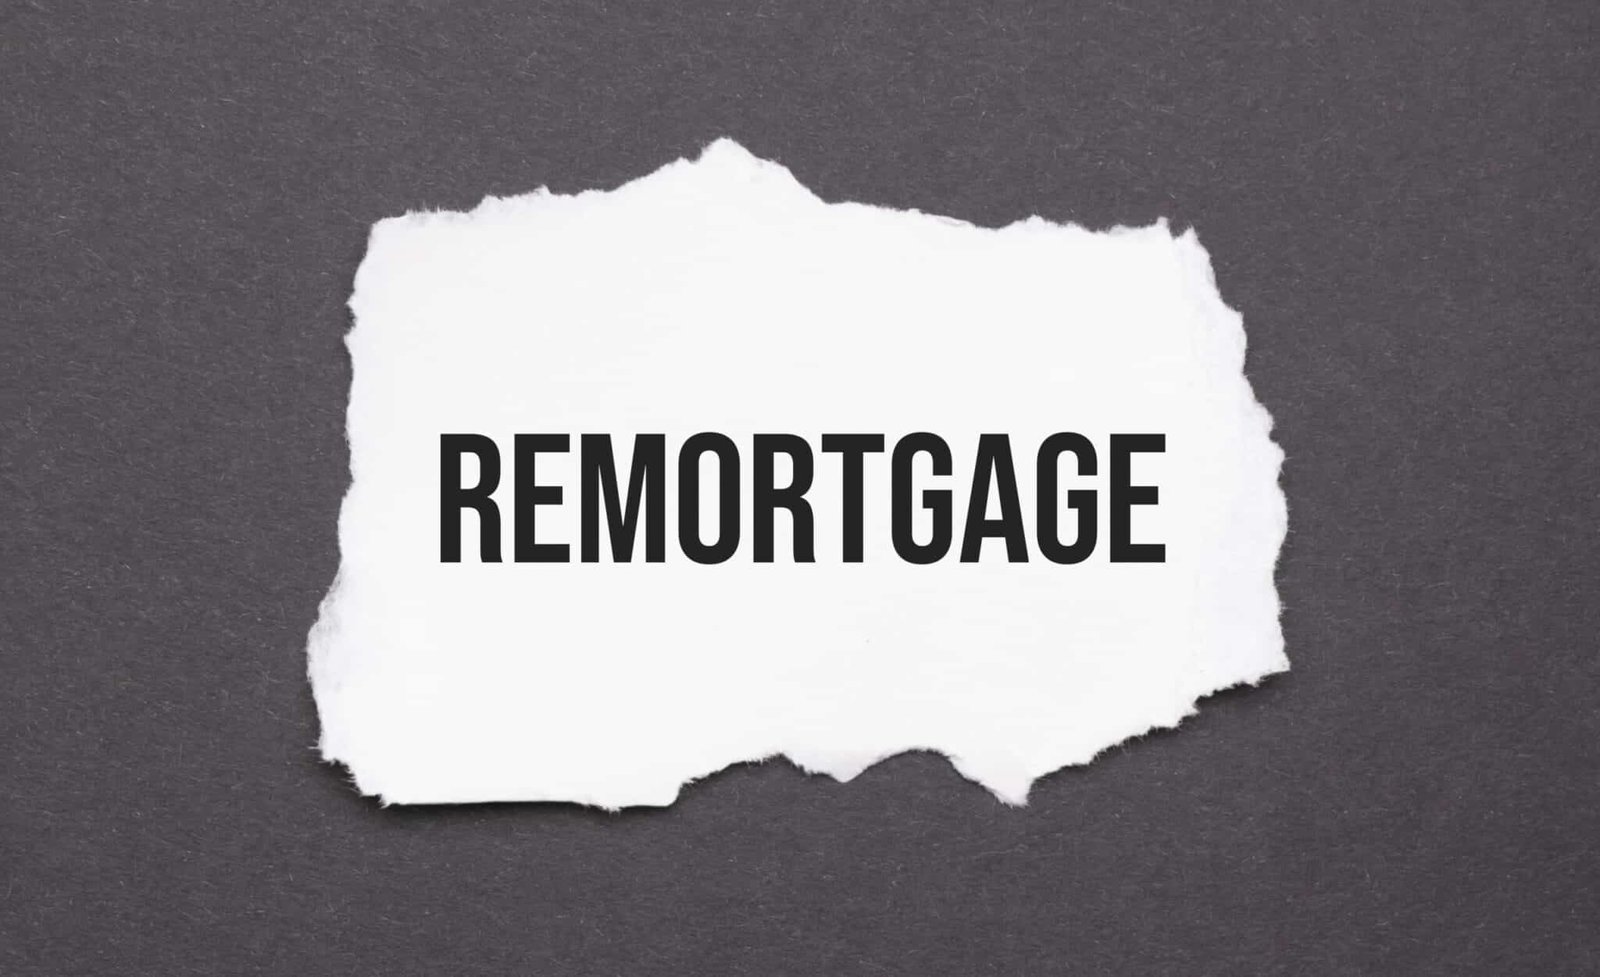 Remortgage written on torn paper